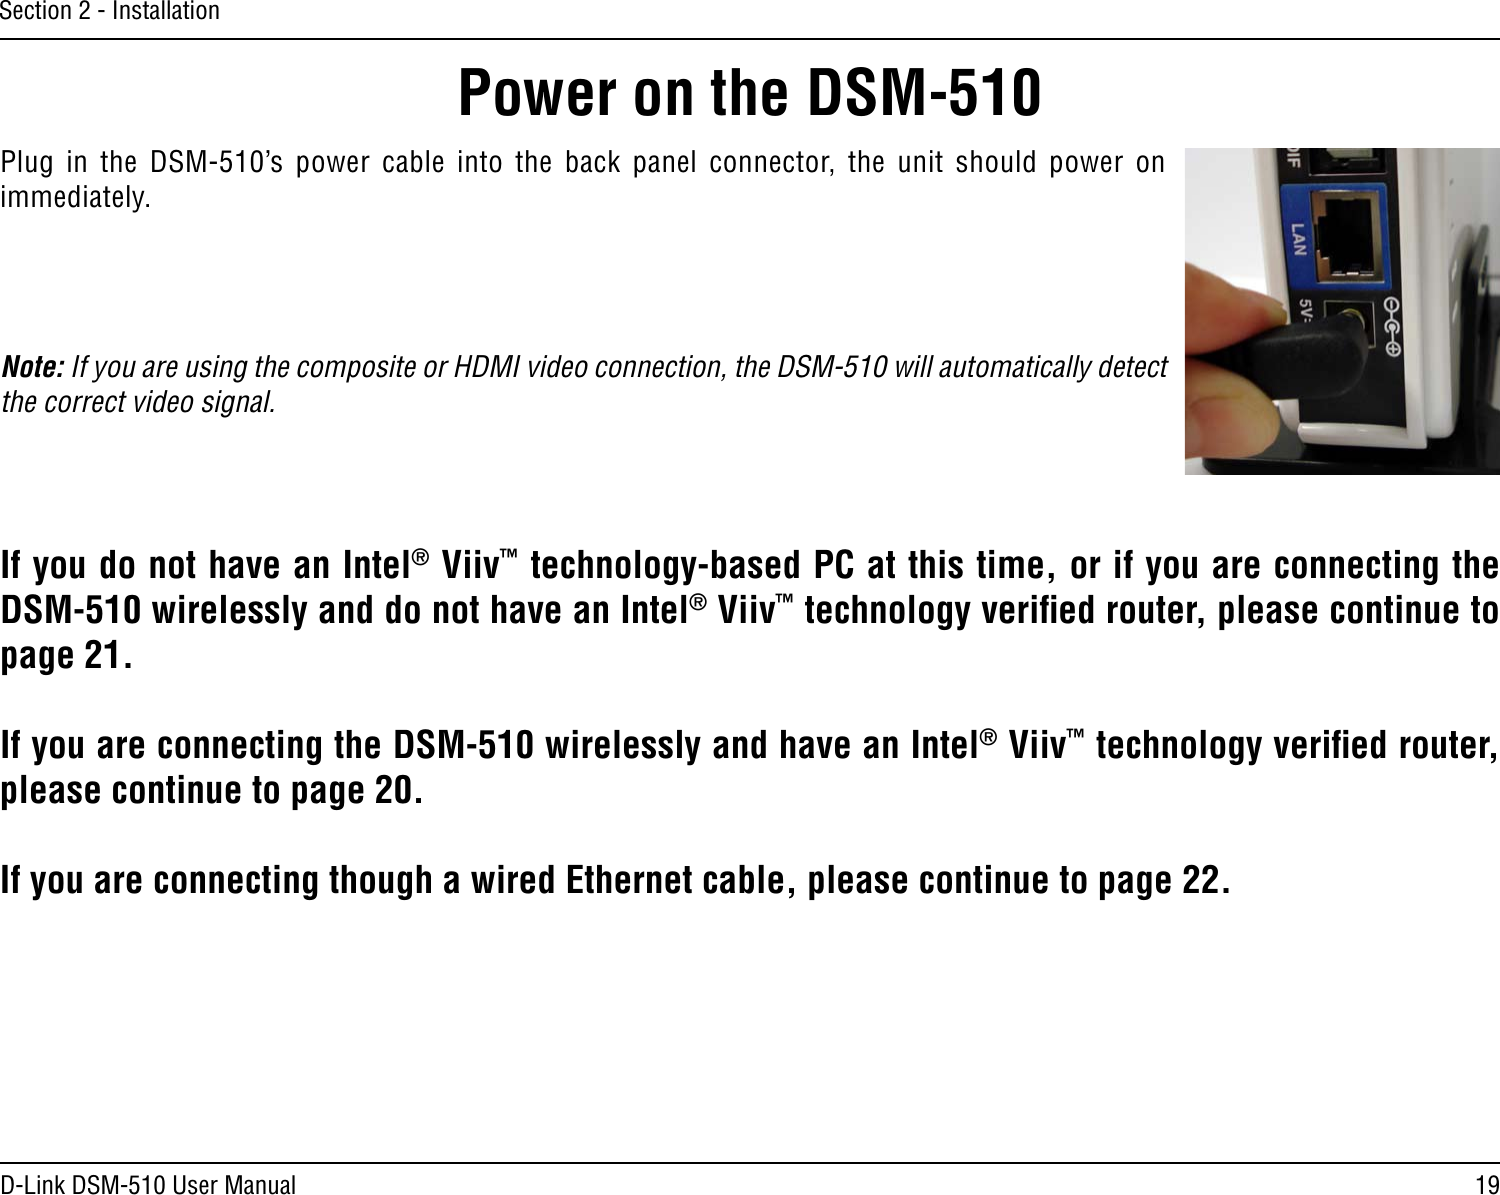 19D-Link DSM-510 User ManualSection 2 - InstallationPower on the DSM-510Plug  in  the  DSM-510’s power  cable  into  the  back  panel  connector,  the  unit  should  power  on immediately. Note: If you are using the composite or HDMI video connection, the DSM-510 will automatically detect the correct video signal.If you do not have an Intel® Viiv™ technology-based PC at this time, or if you are connecting the DSM-510 wirelessly and do not have an Intel® Viiv™ technology veriﬁed router, please continue to page 21.If you are connecting the DSM-510 wirelessly and have an Intel® Viiv™ technology veriﬁed router, please continue to page 20.If you are connecting though a wired Ethernet cable, please continue to page 22.